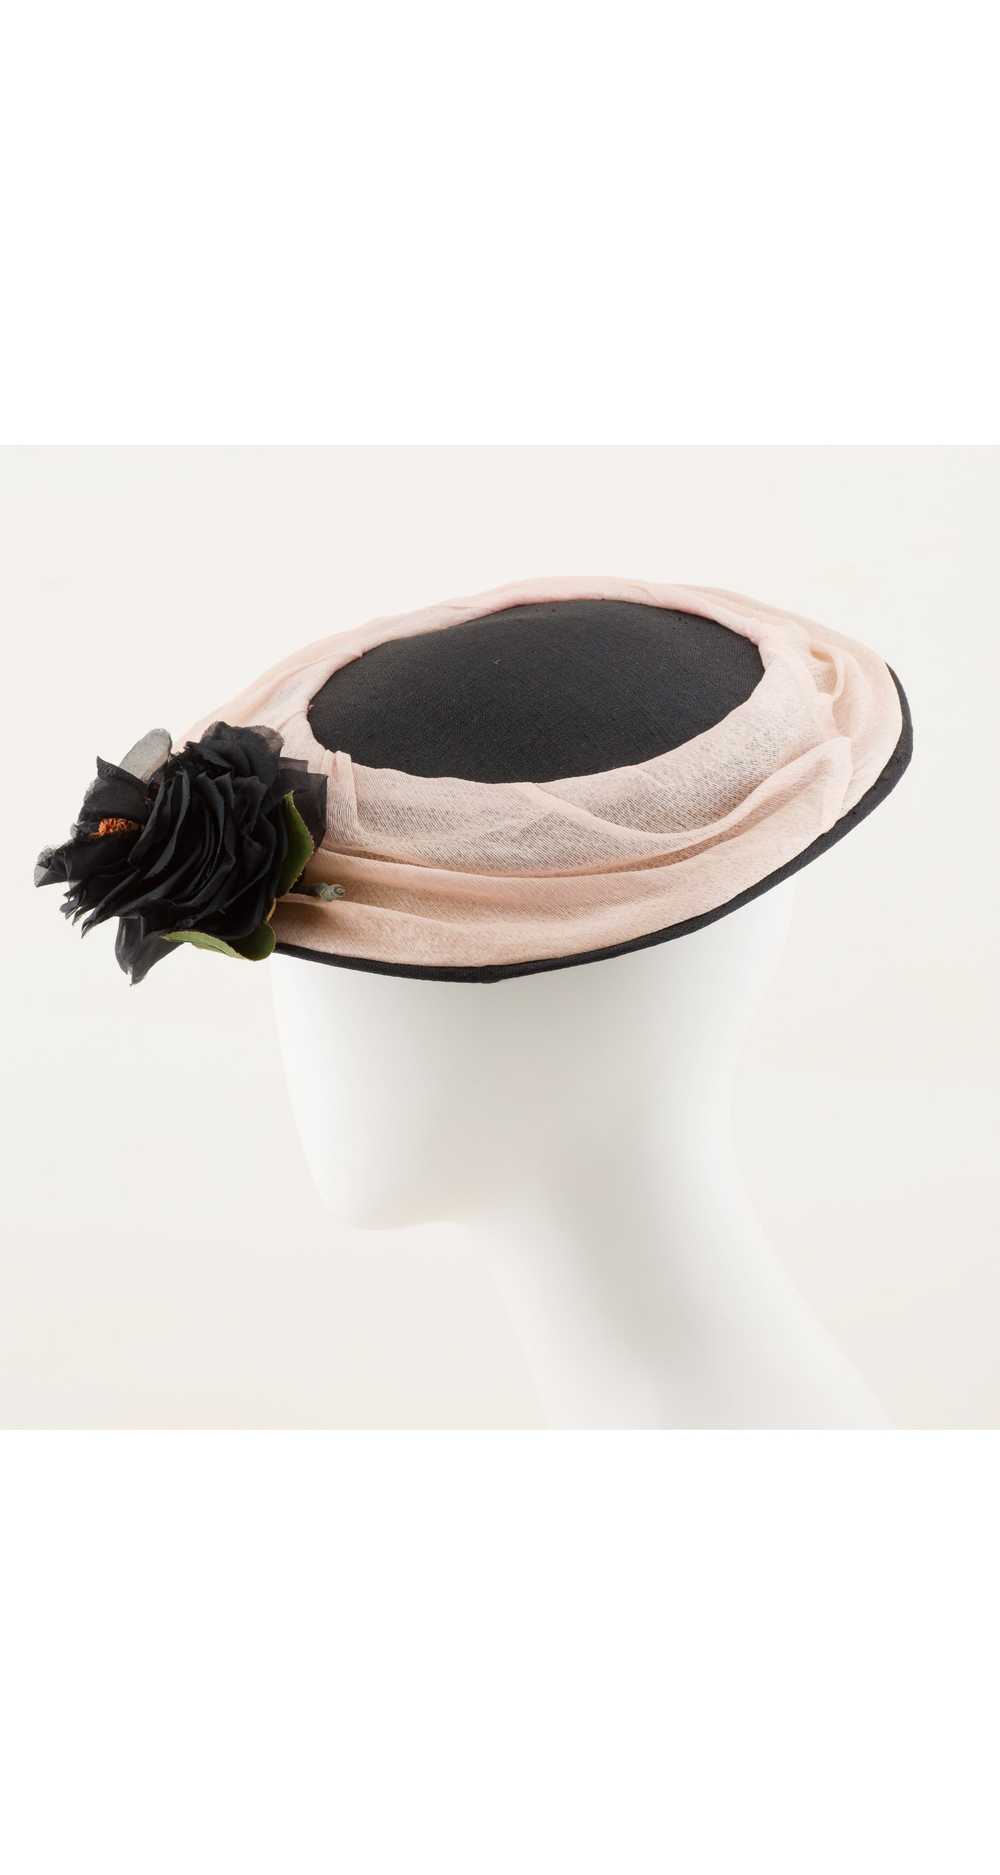 Jacques Fath 1950s Pink & Black Straw Saucer Fasc… - image 4